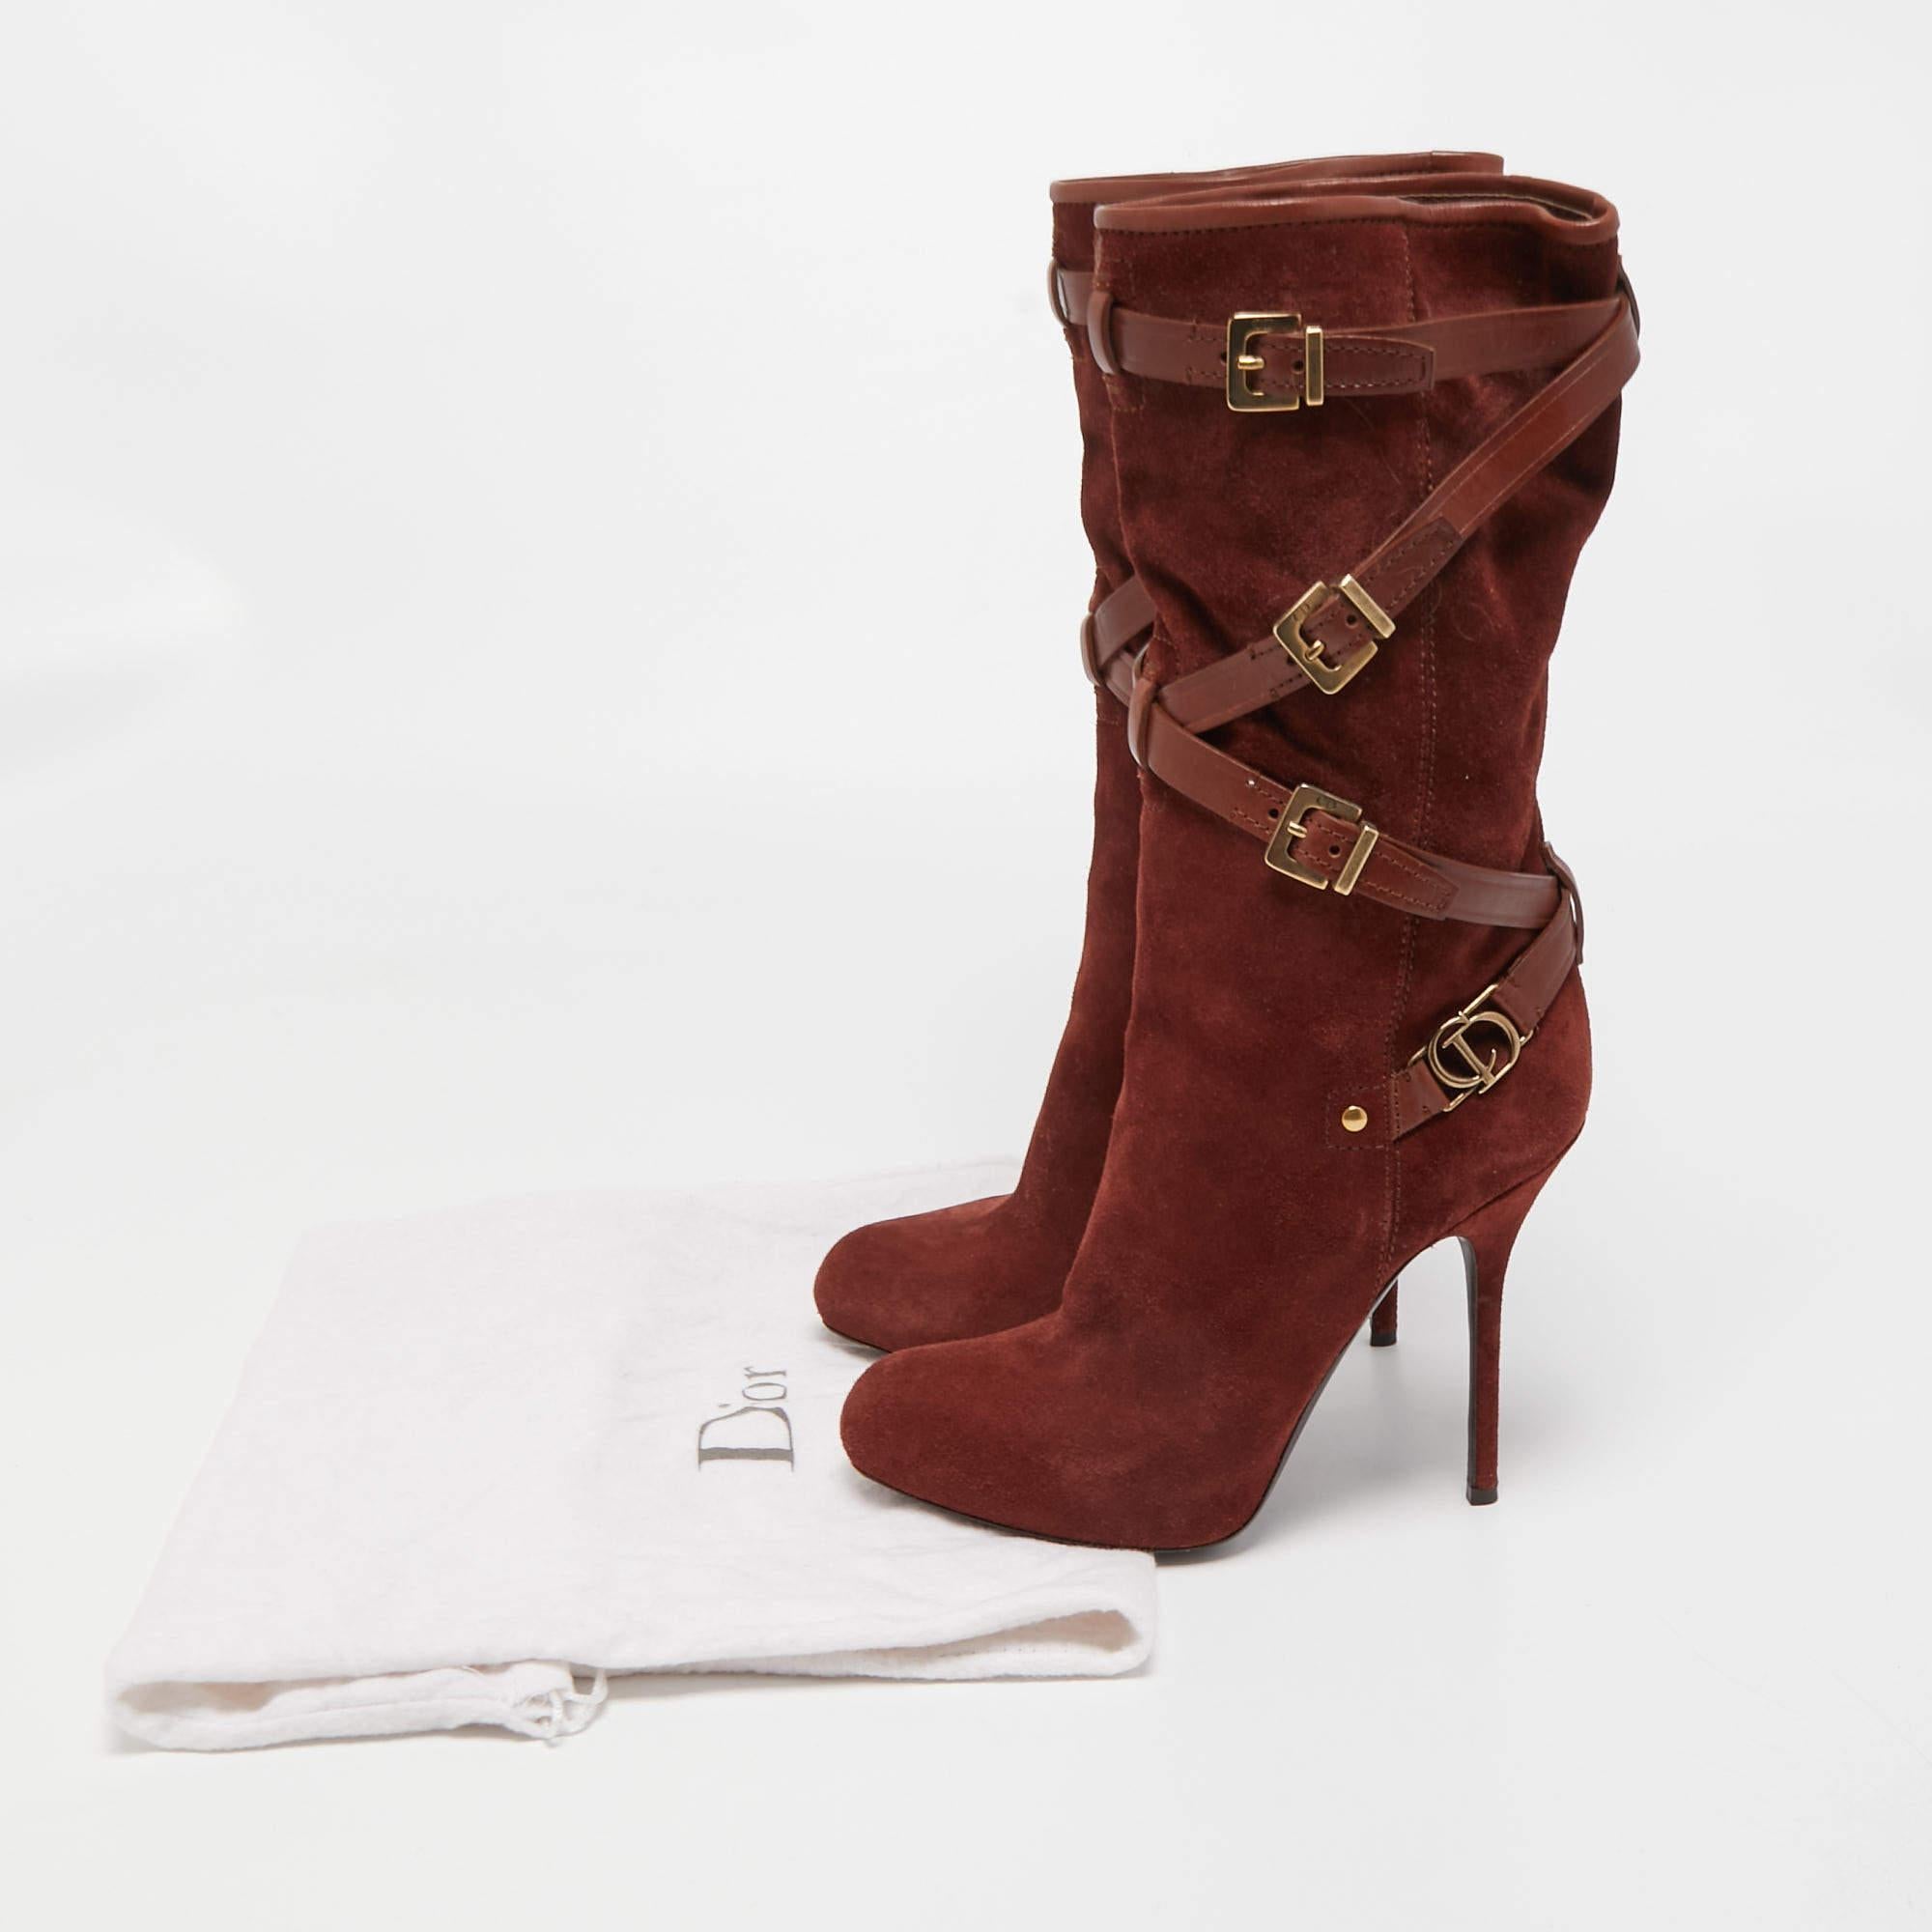 Dior Brown Suede and Leather Buckle Detail Mid Calf Boots Size 38 5